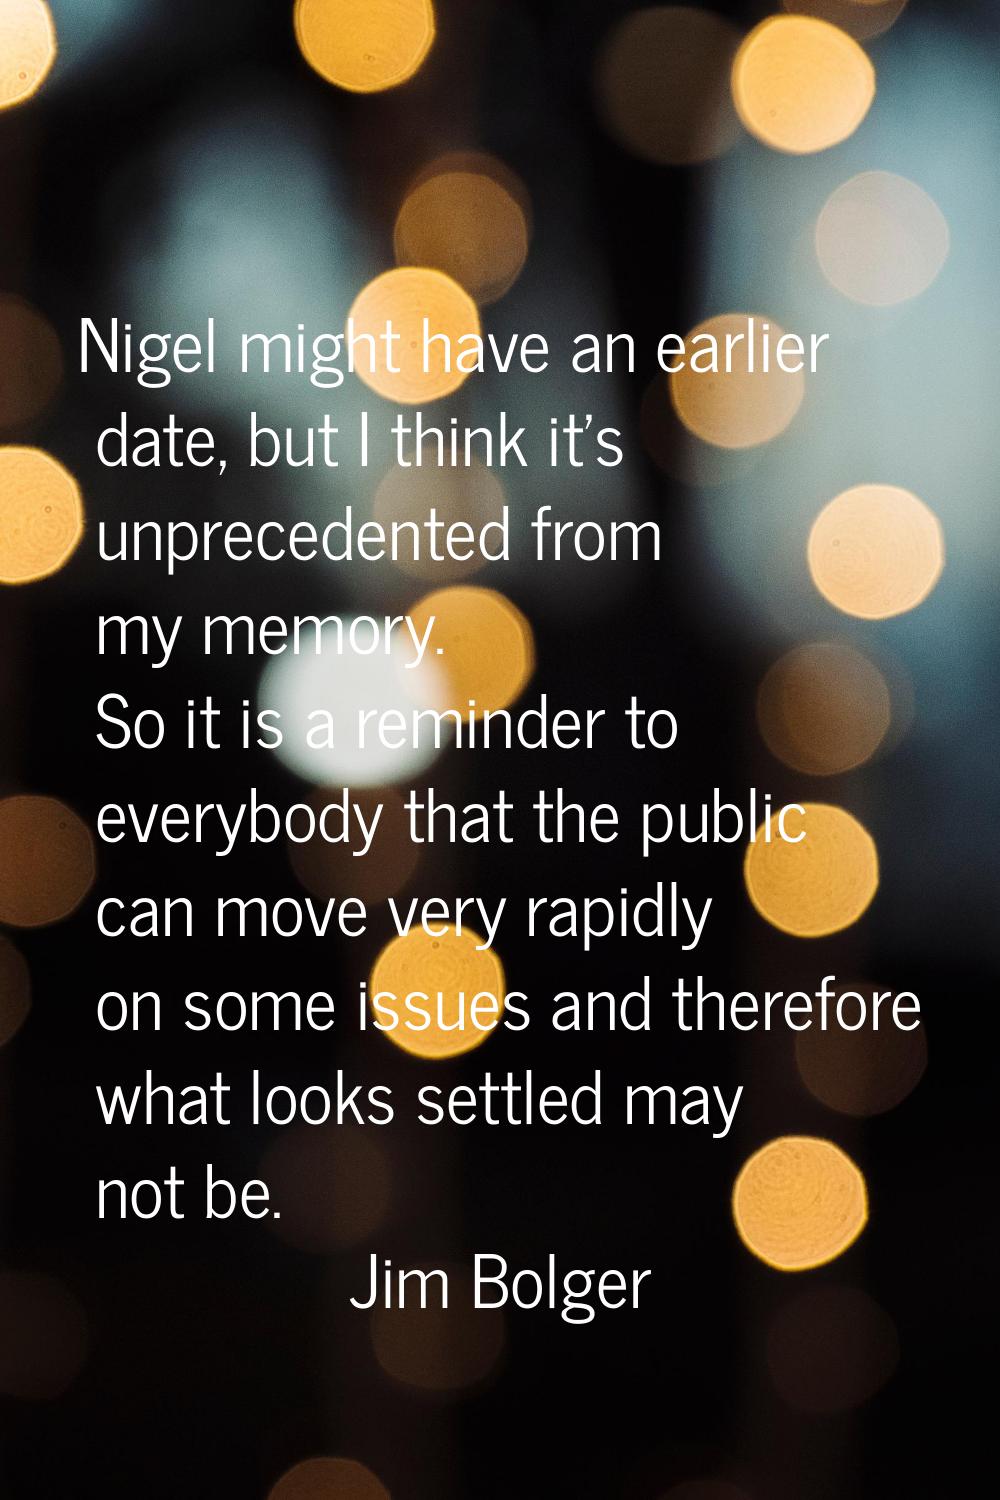 Nigel might have an earlier date, but I think it's unprecedented from my memory. So it is a reminde